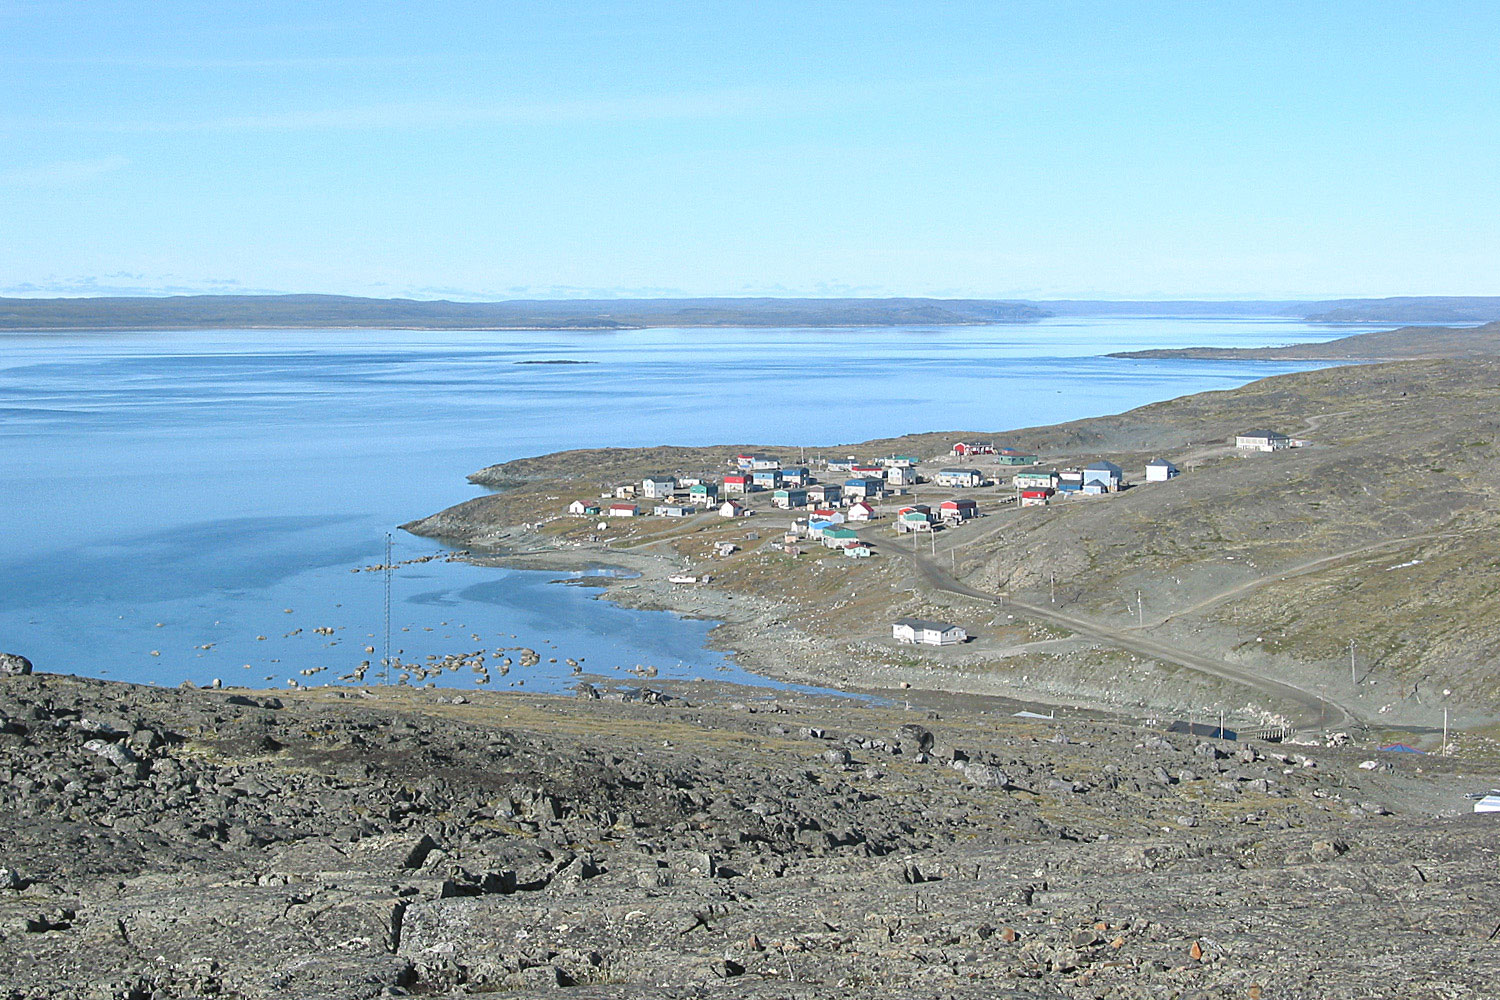 Photo of a small Aboriginal village on the edge of the water in northern Quebec